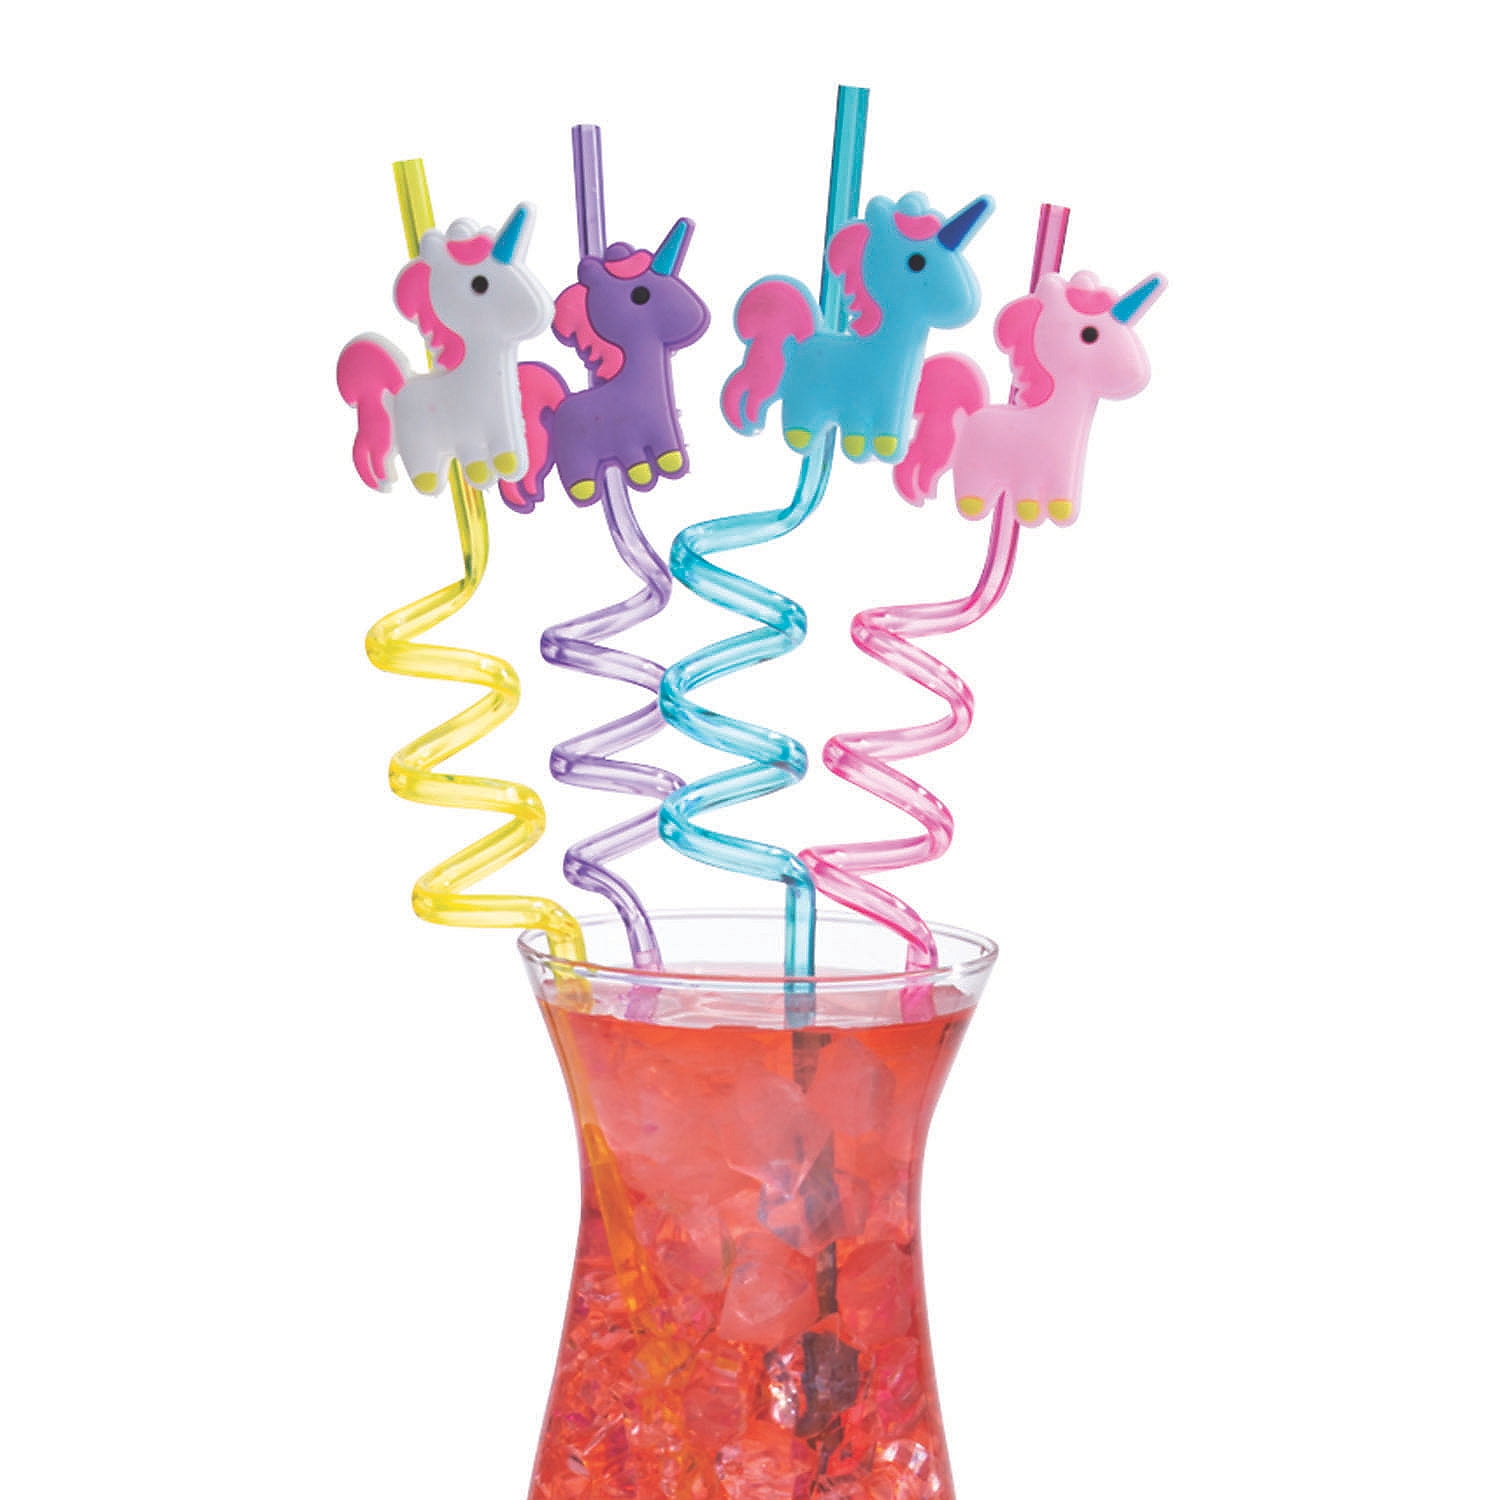 6Pc Assorted Silly Straws Pack Kids Party Bag Fun Colourful Drinks Accessories 